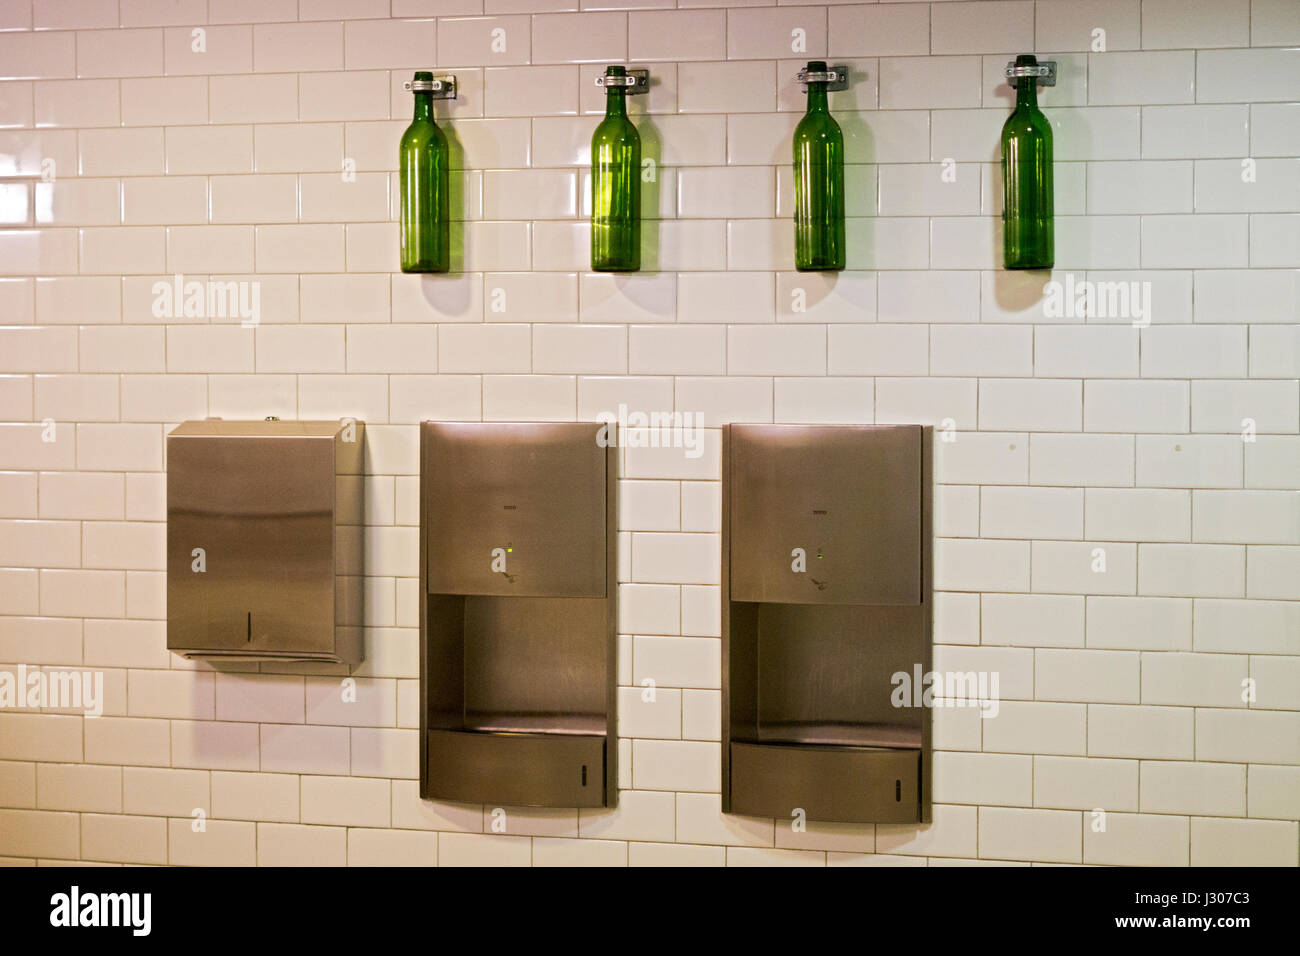 A wall in the mans room at EATALY with olive oil bottles as decoration. In the Flatiron section of Manhattan, New York City Stock Photo